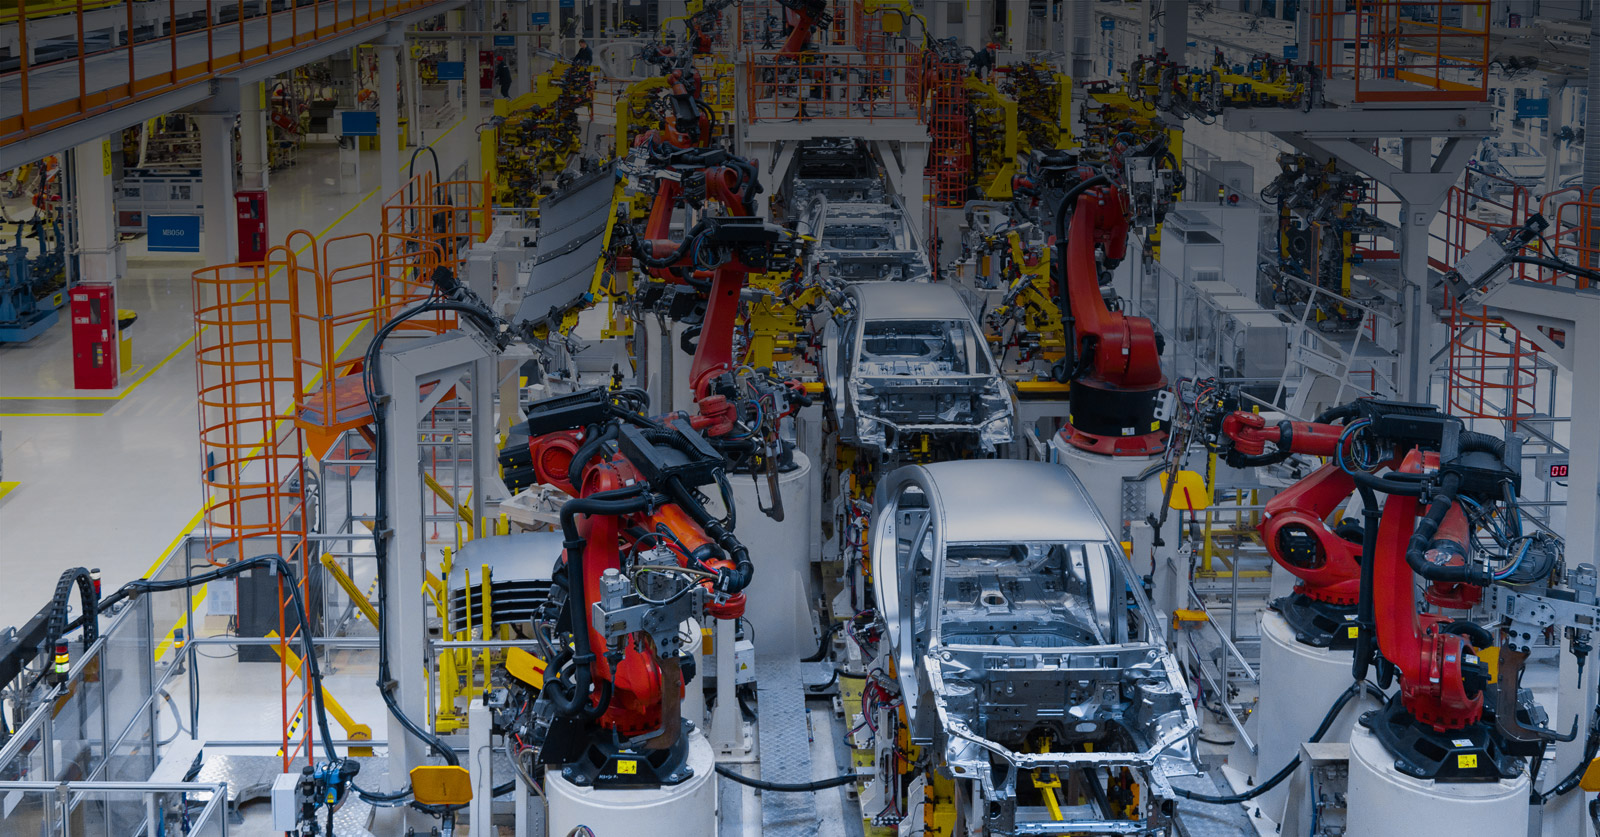 Photograph of the inside of a car manufacturing facility